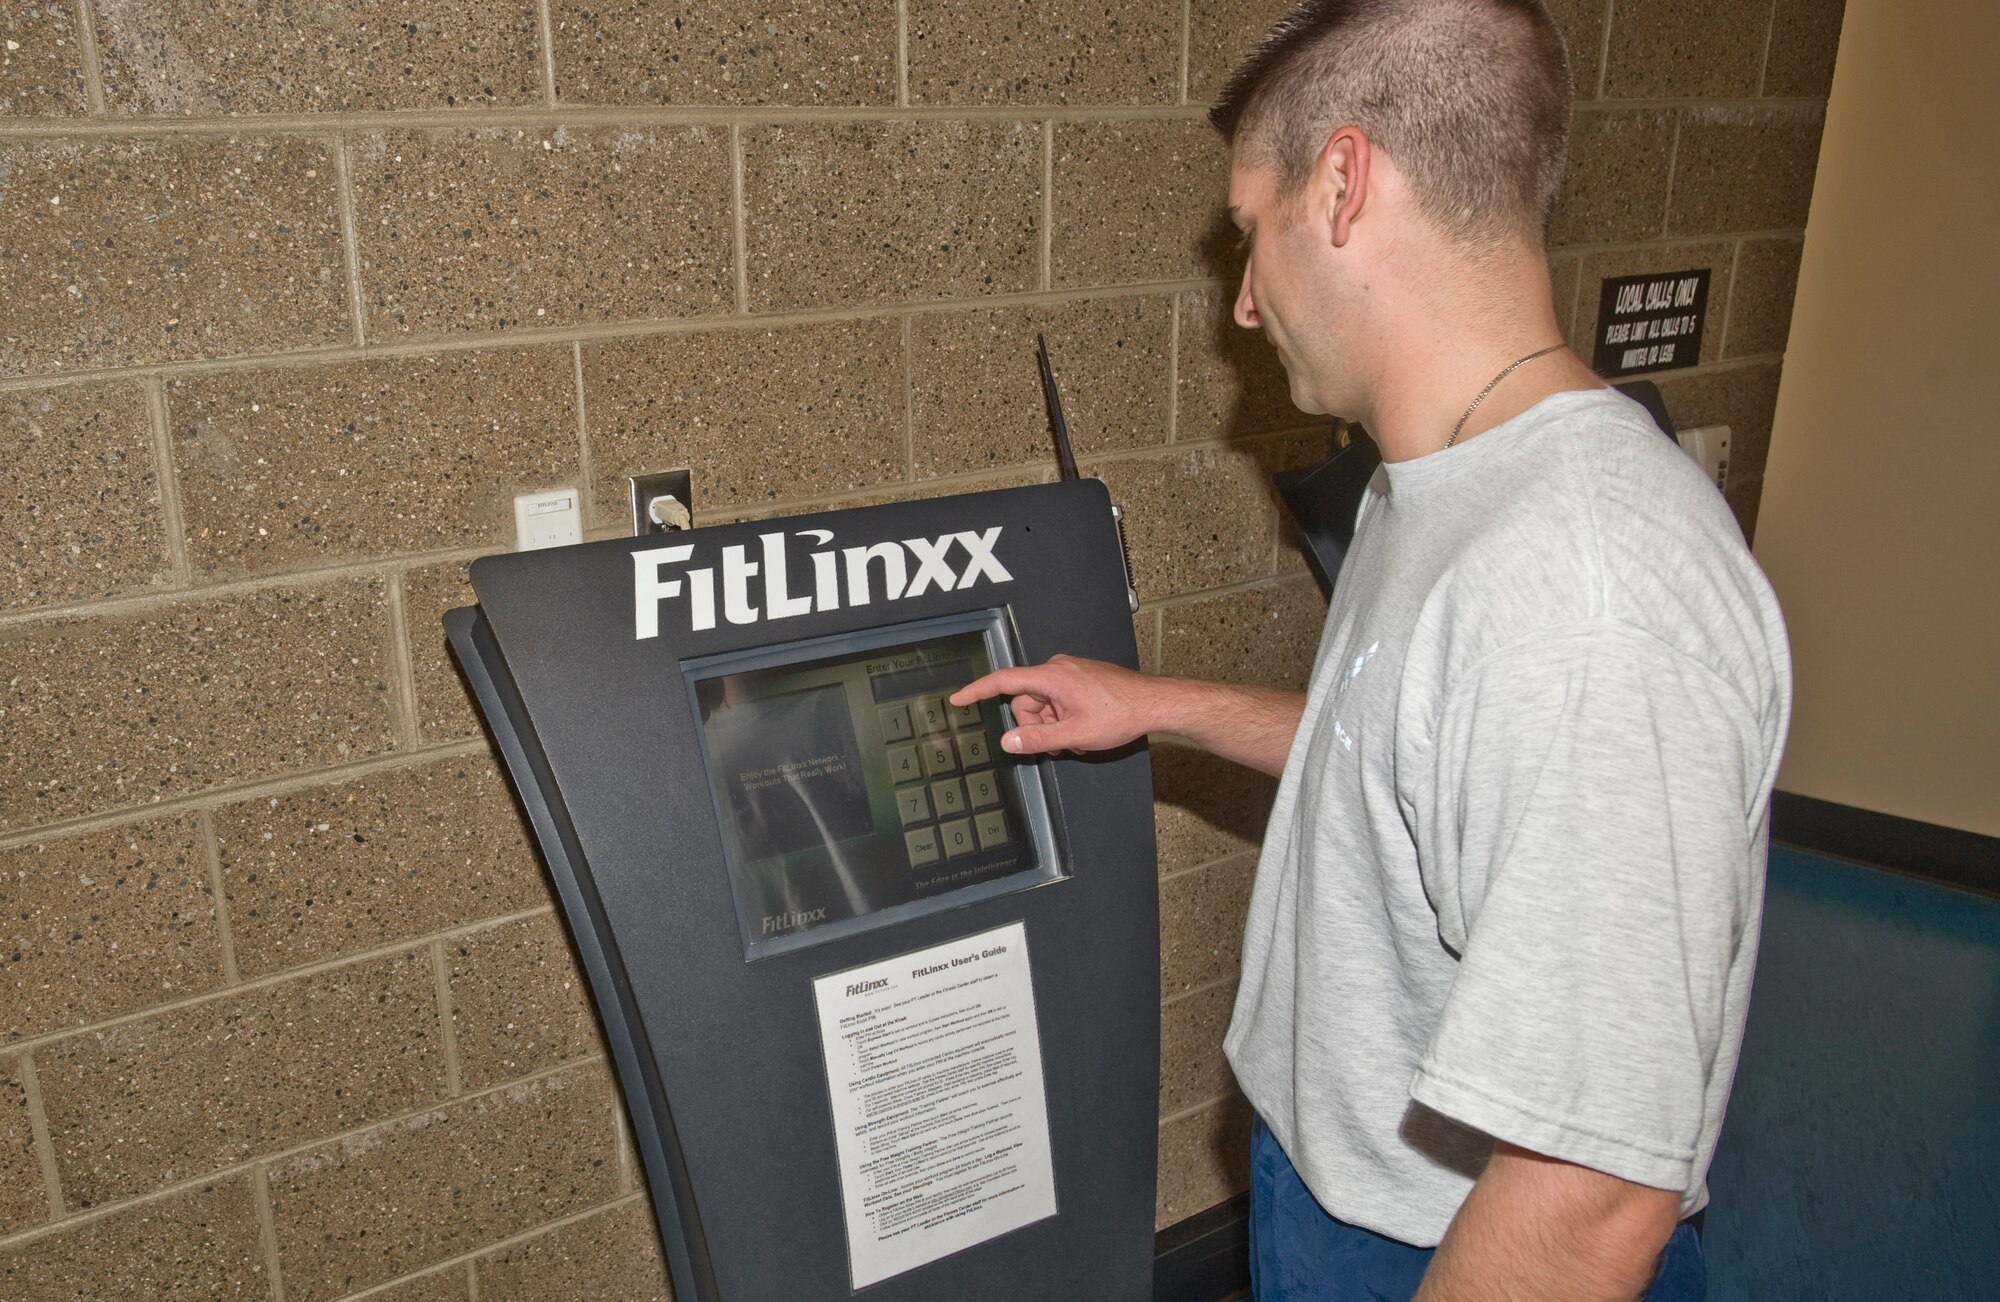 ELMENDORF AIR FORCE BASE, Alaska -- An Arctic Warrior signs into his Fitlinxx account at the kiosks at the Elmendorf Fitness Center Aug. 28. The Fitlinxx program has been available at Elmendorf for nearly 10 years. (U.S. Air Force photo/Airman 1st Class Matt Owens)